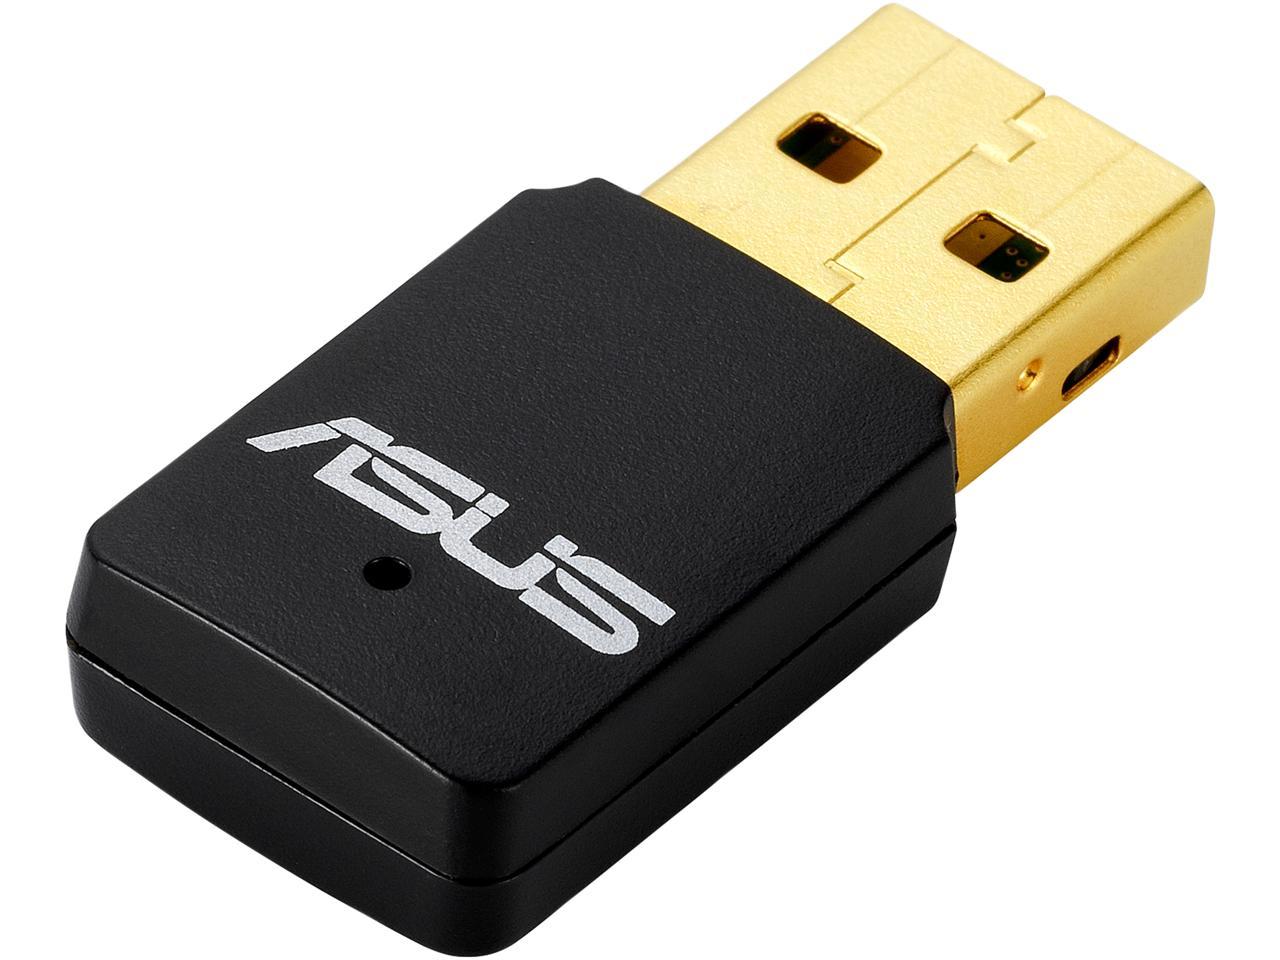 Free ASUS USB Wireless Adapter After Rebate